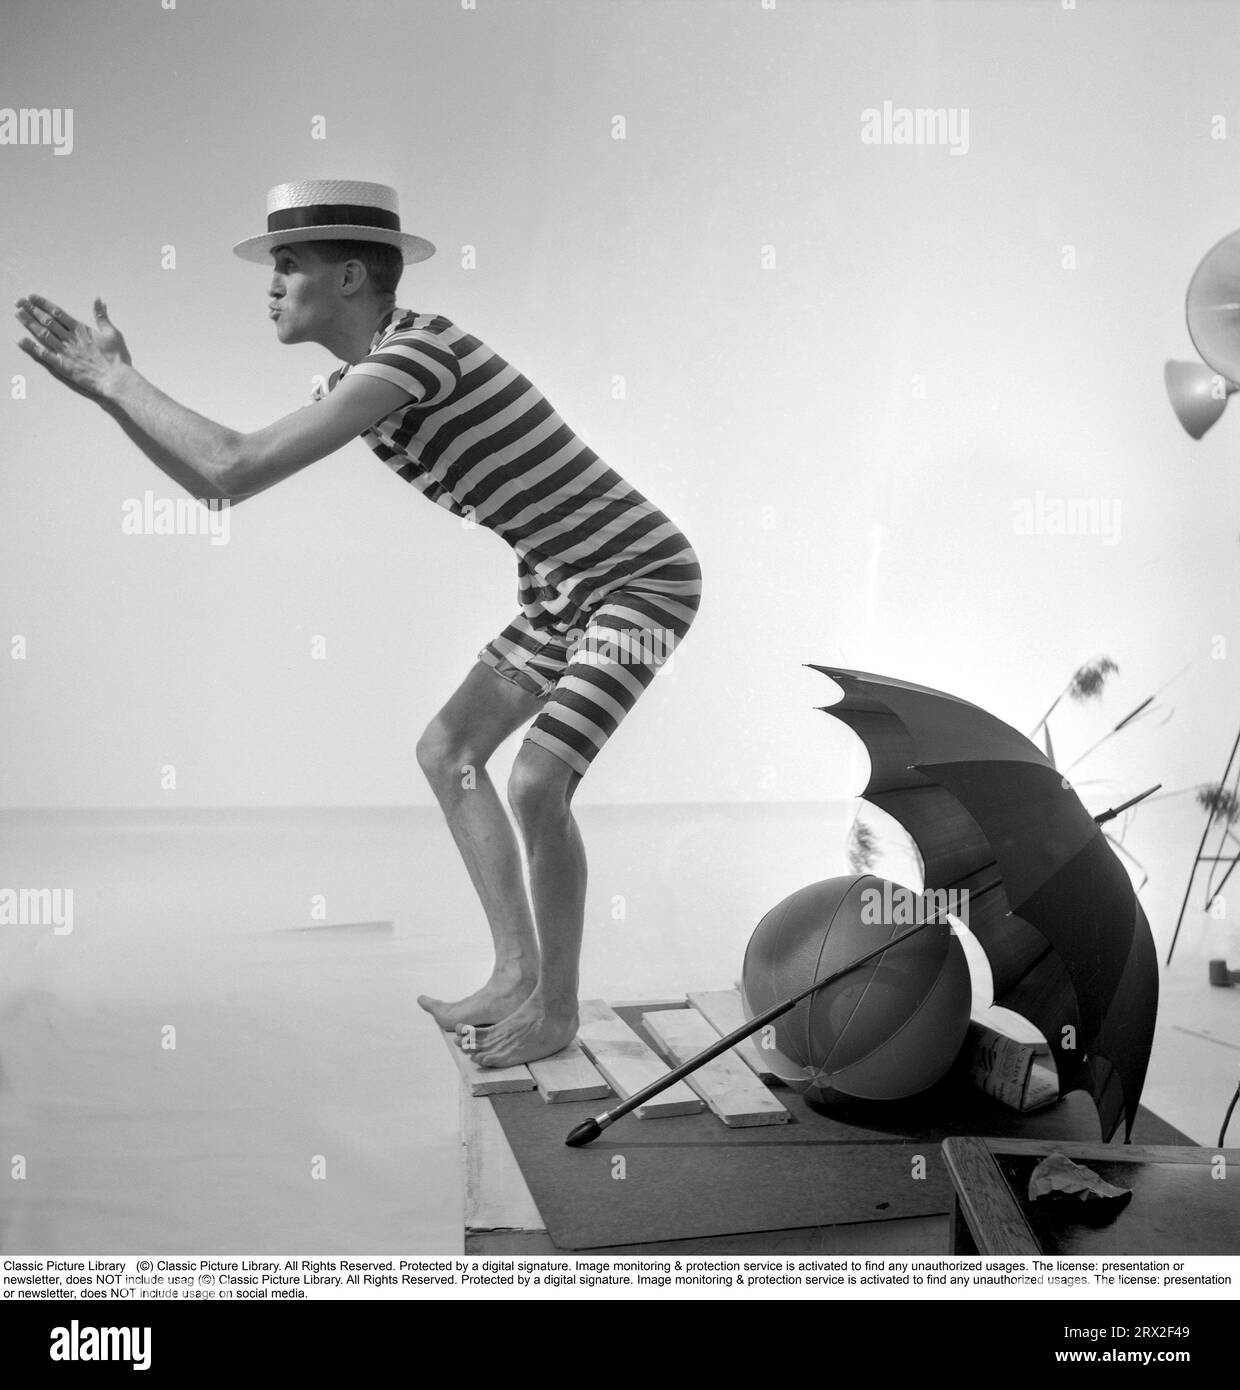 Prepared for the beach regardless of weather. The man is oddly enough dressed in a historical male bathing suit that was used in te beginning of the 20th century in a striped dark and light pattern.He wears a dixie hat and pretends to dive into the water with his hands in front of him. He is prepared for bad weather as an umbrella is in the picture. Sweden 1956 Stock Photo